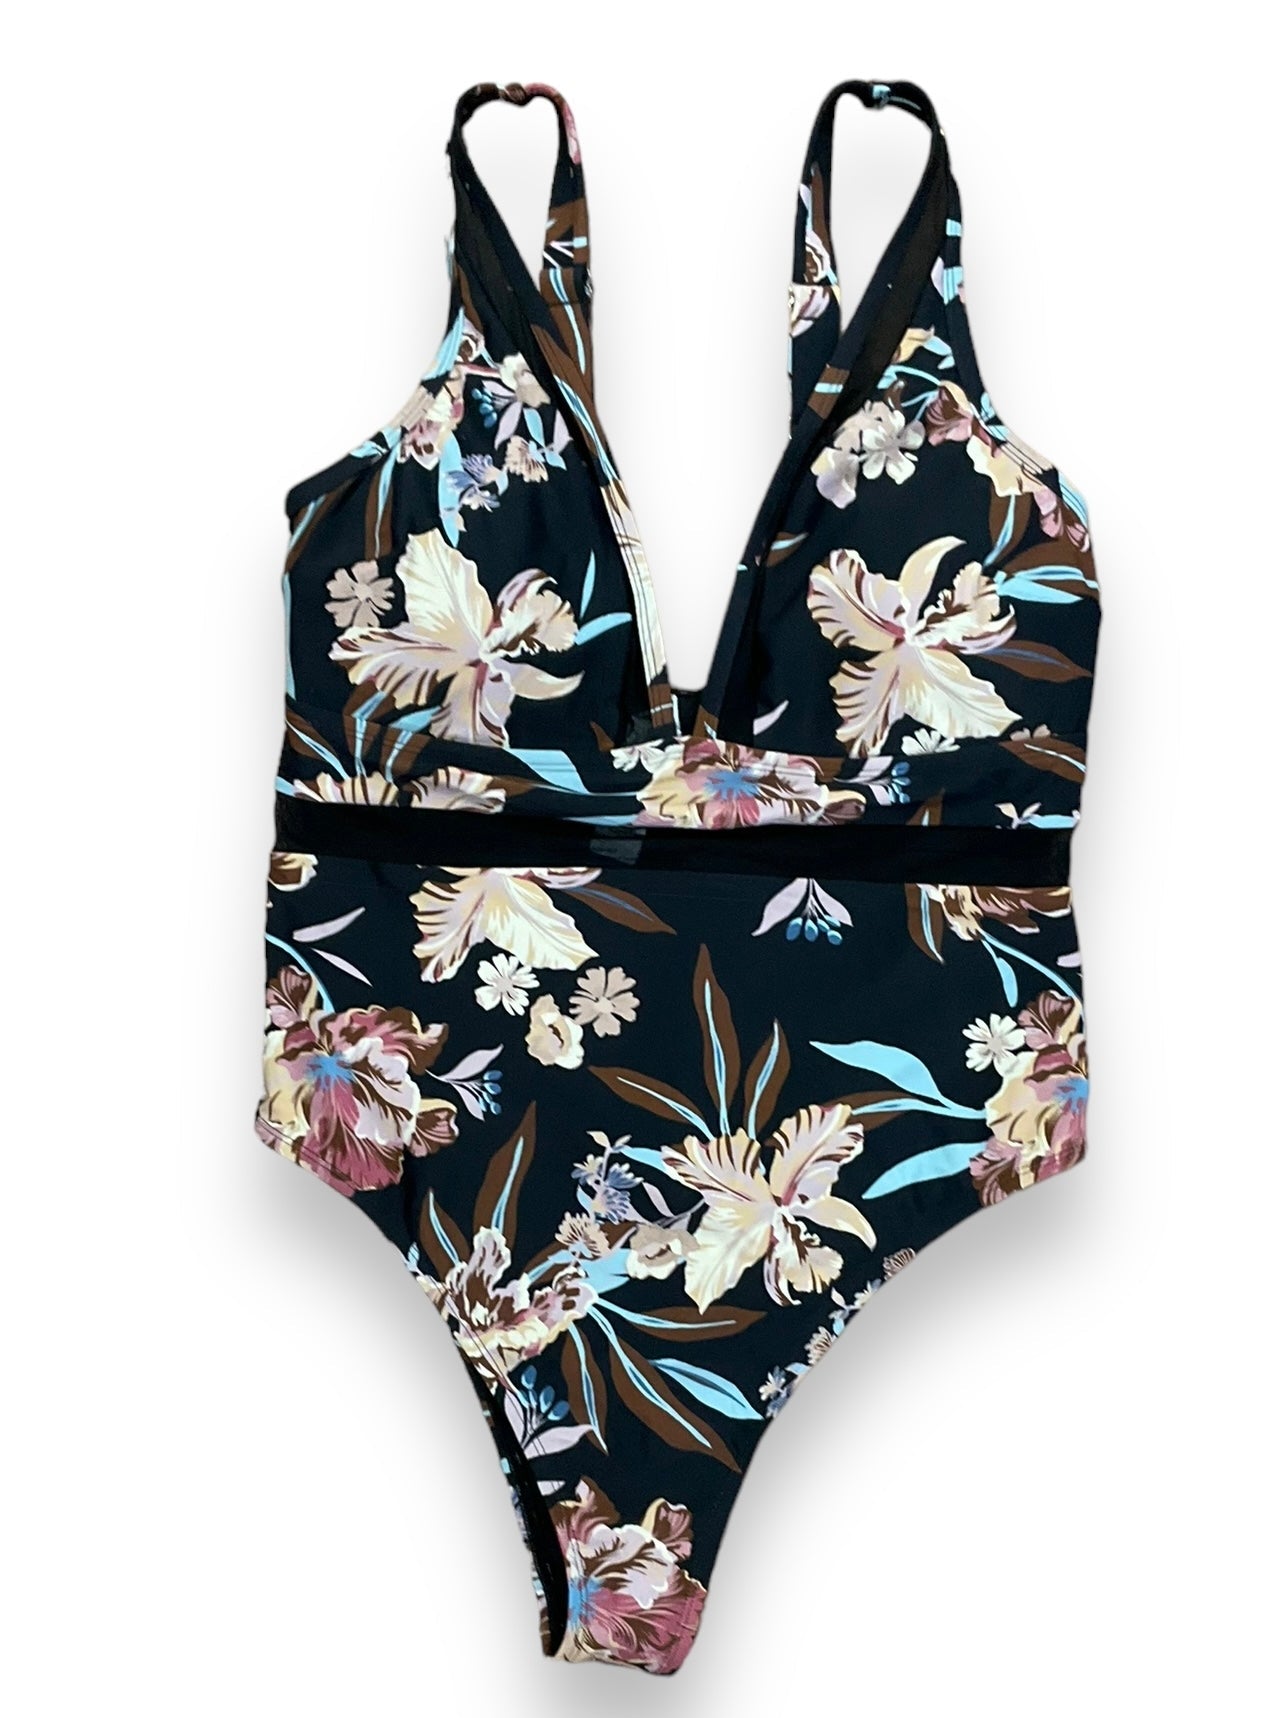 Floral Print Swimsuit Cupshe, Size 1x